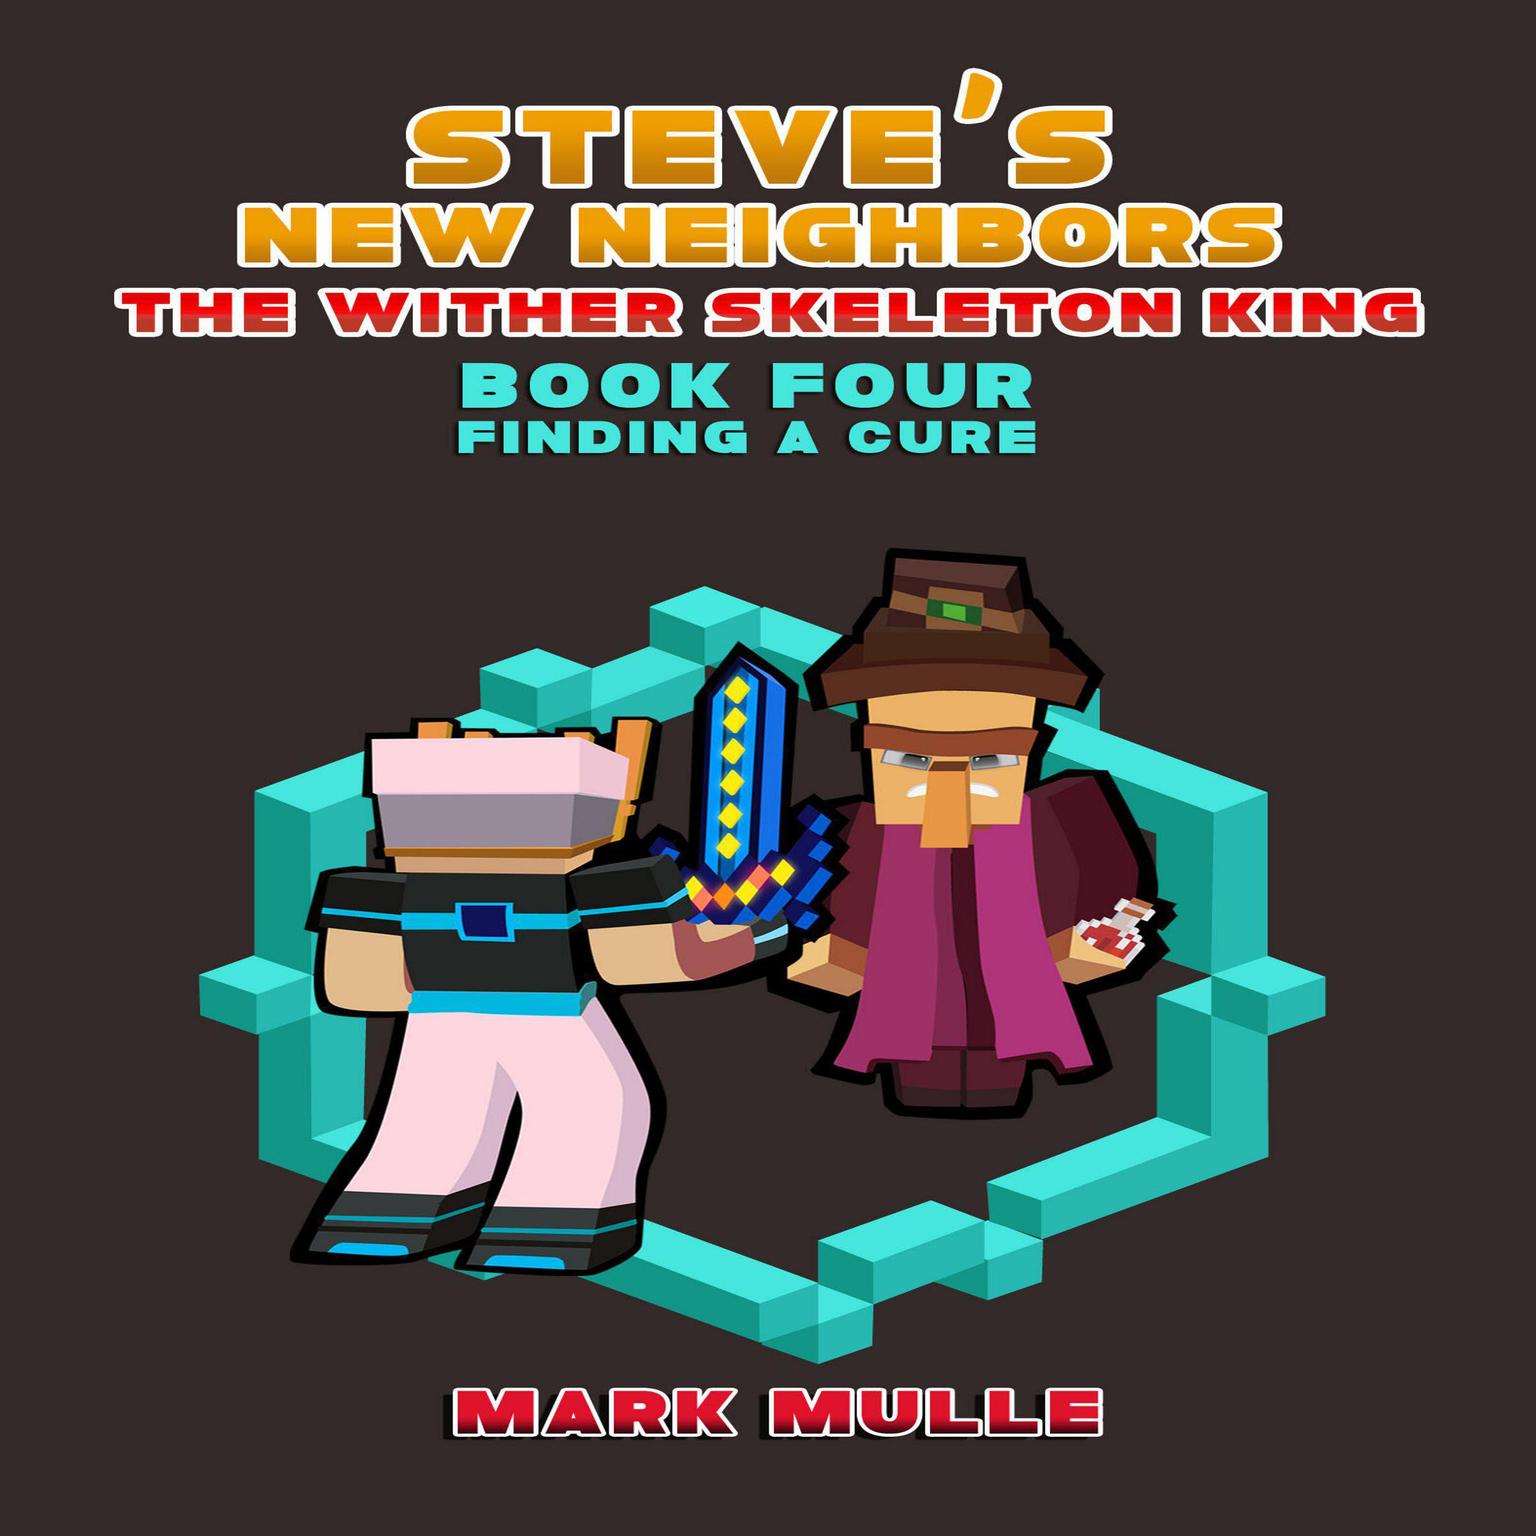 Steves New Neighbors: The Wither Skeleton King (Book 4): Finding a Cure (An Unofficial Minecraft Diary Book for Kids Ages 9 - 12 (Preteen)  Audiobook, by Mark Mulle